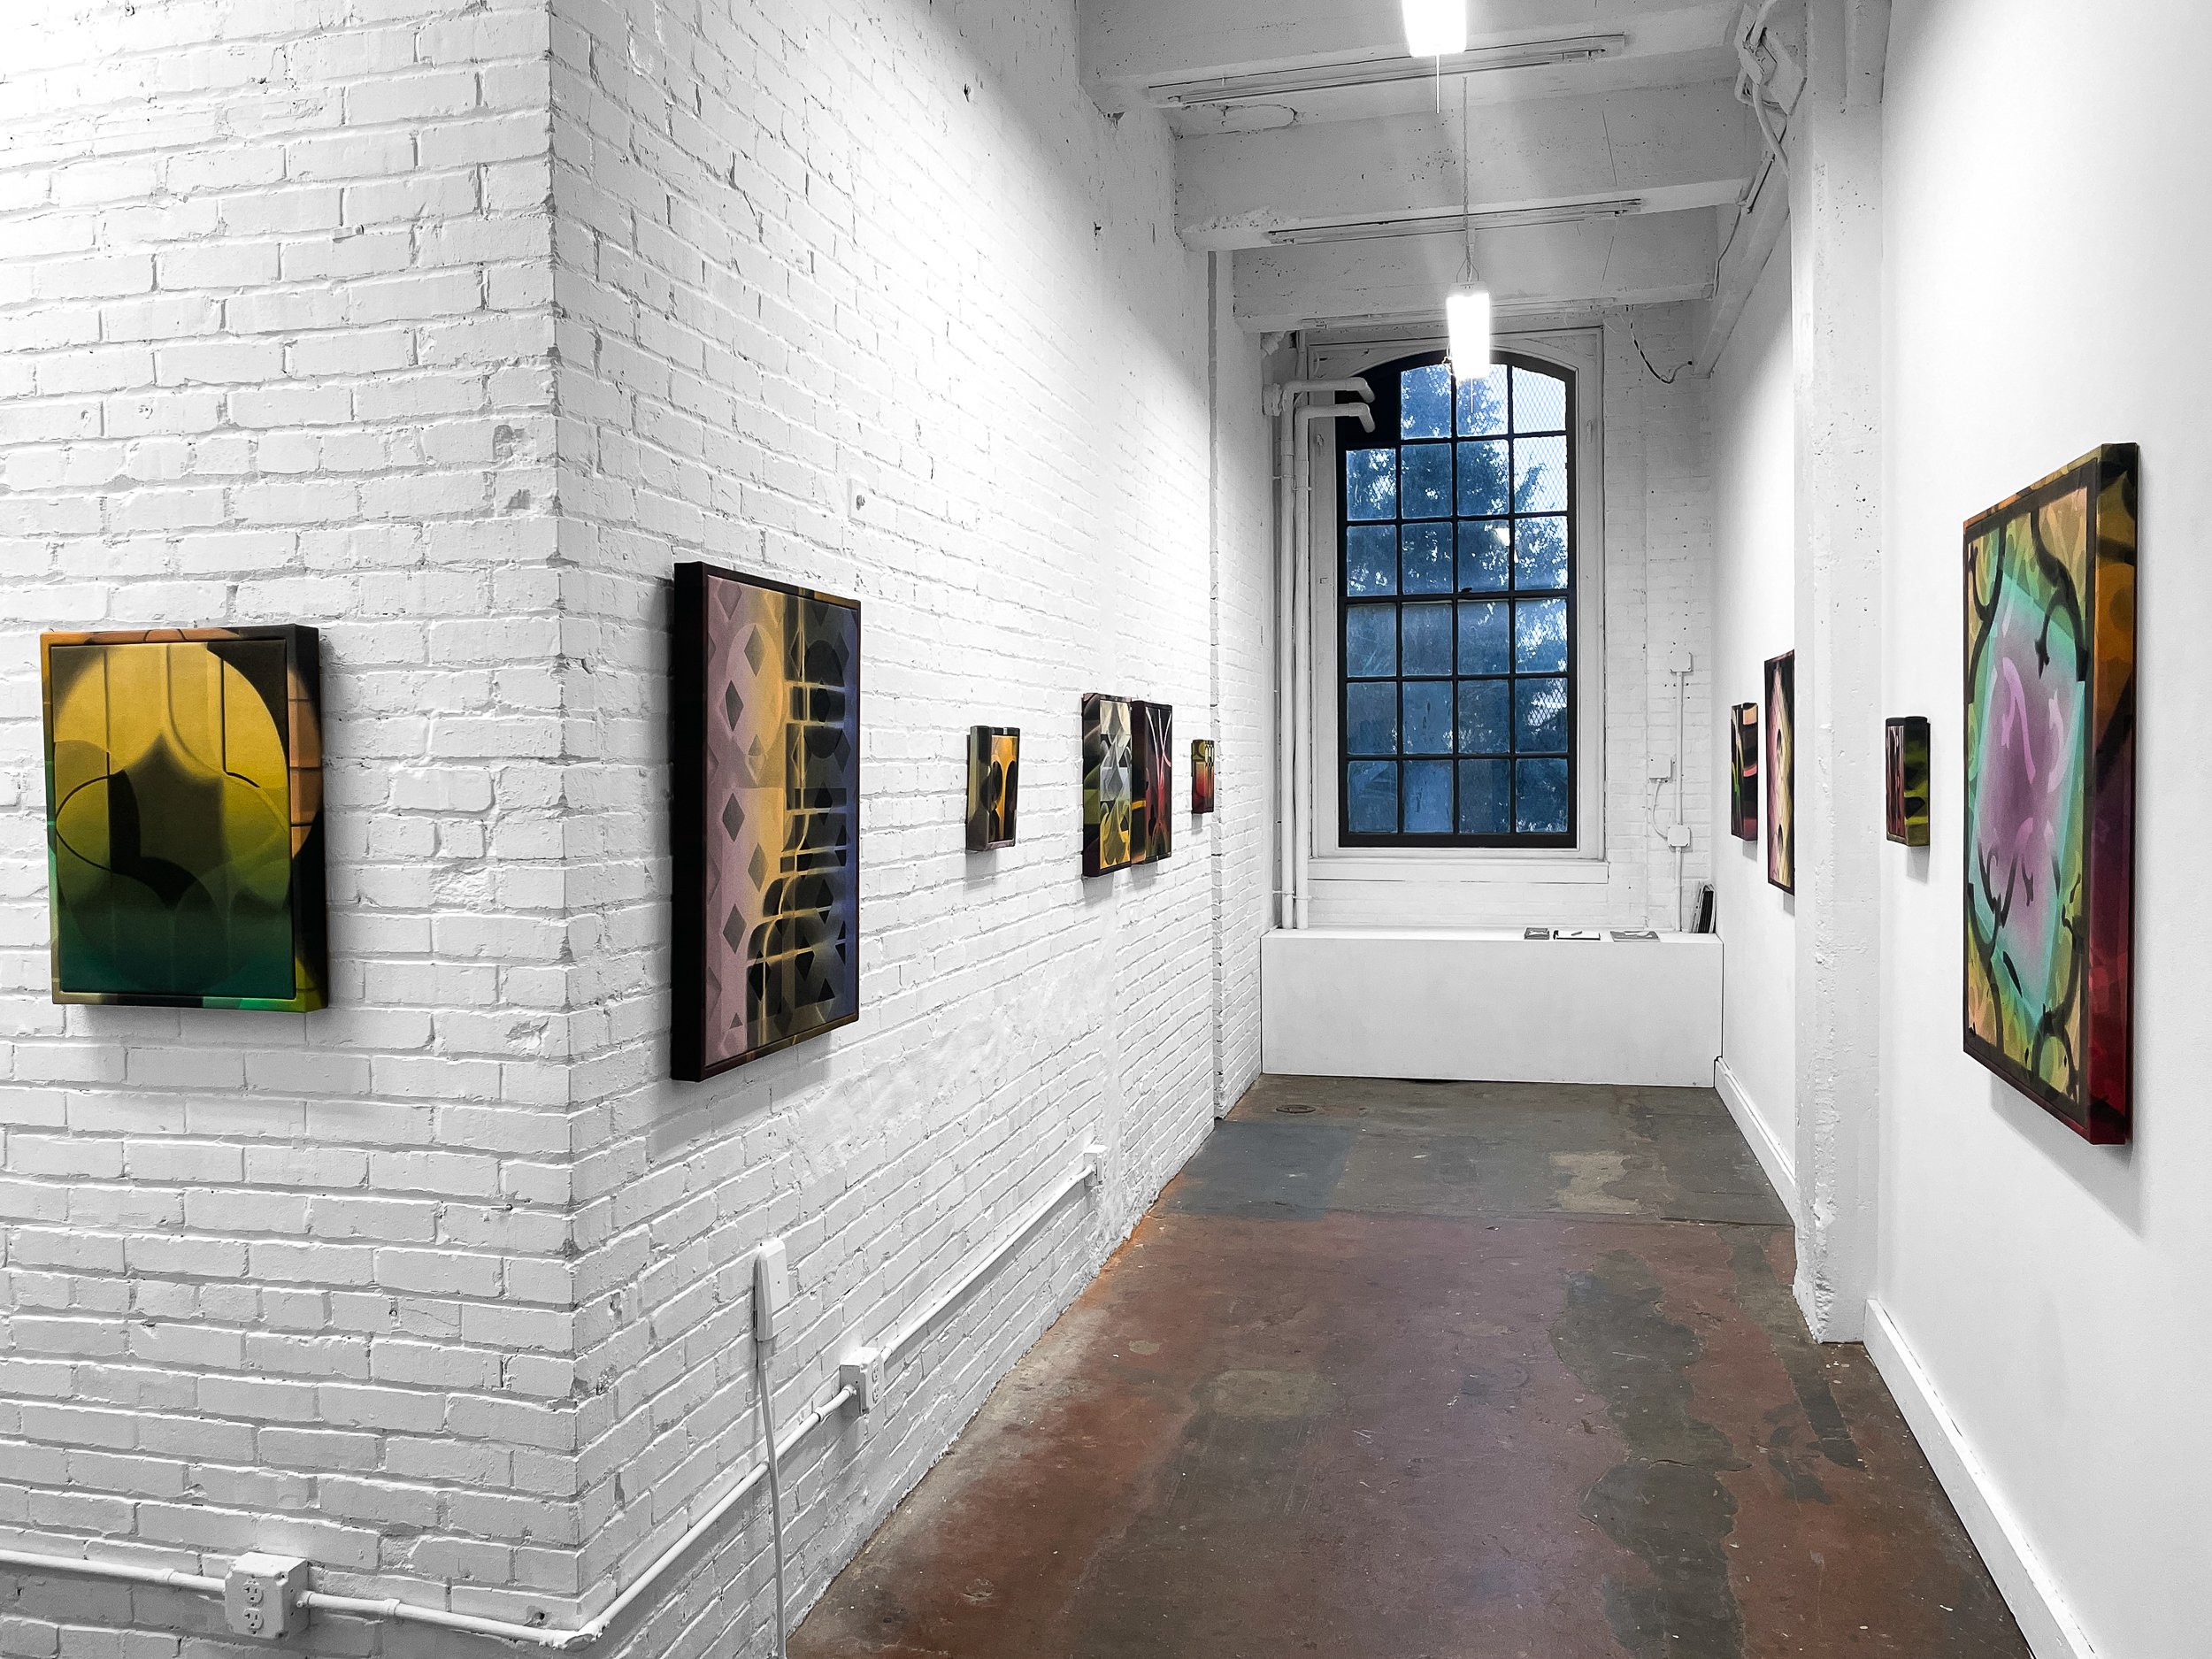  Installation view. Photo credit: Peep Projects 